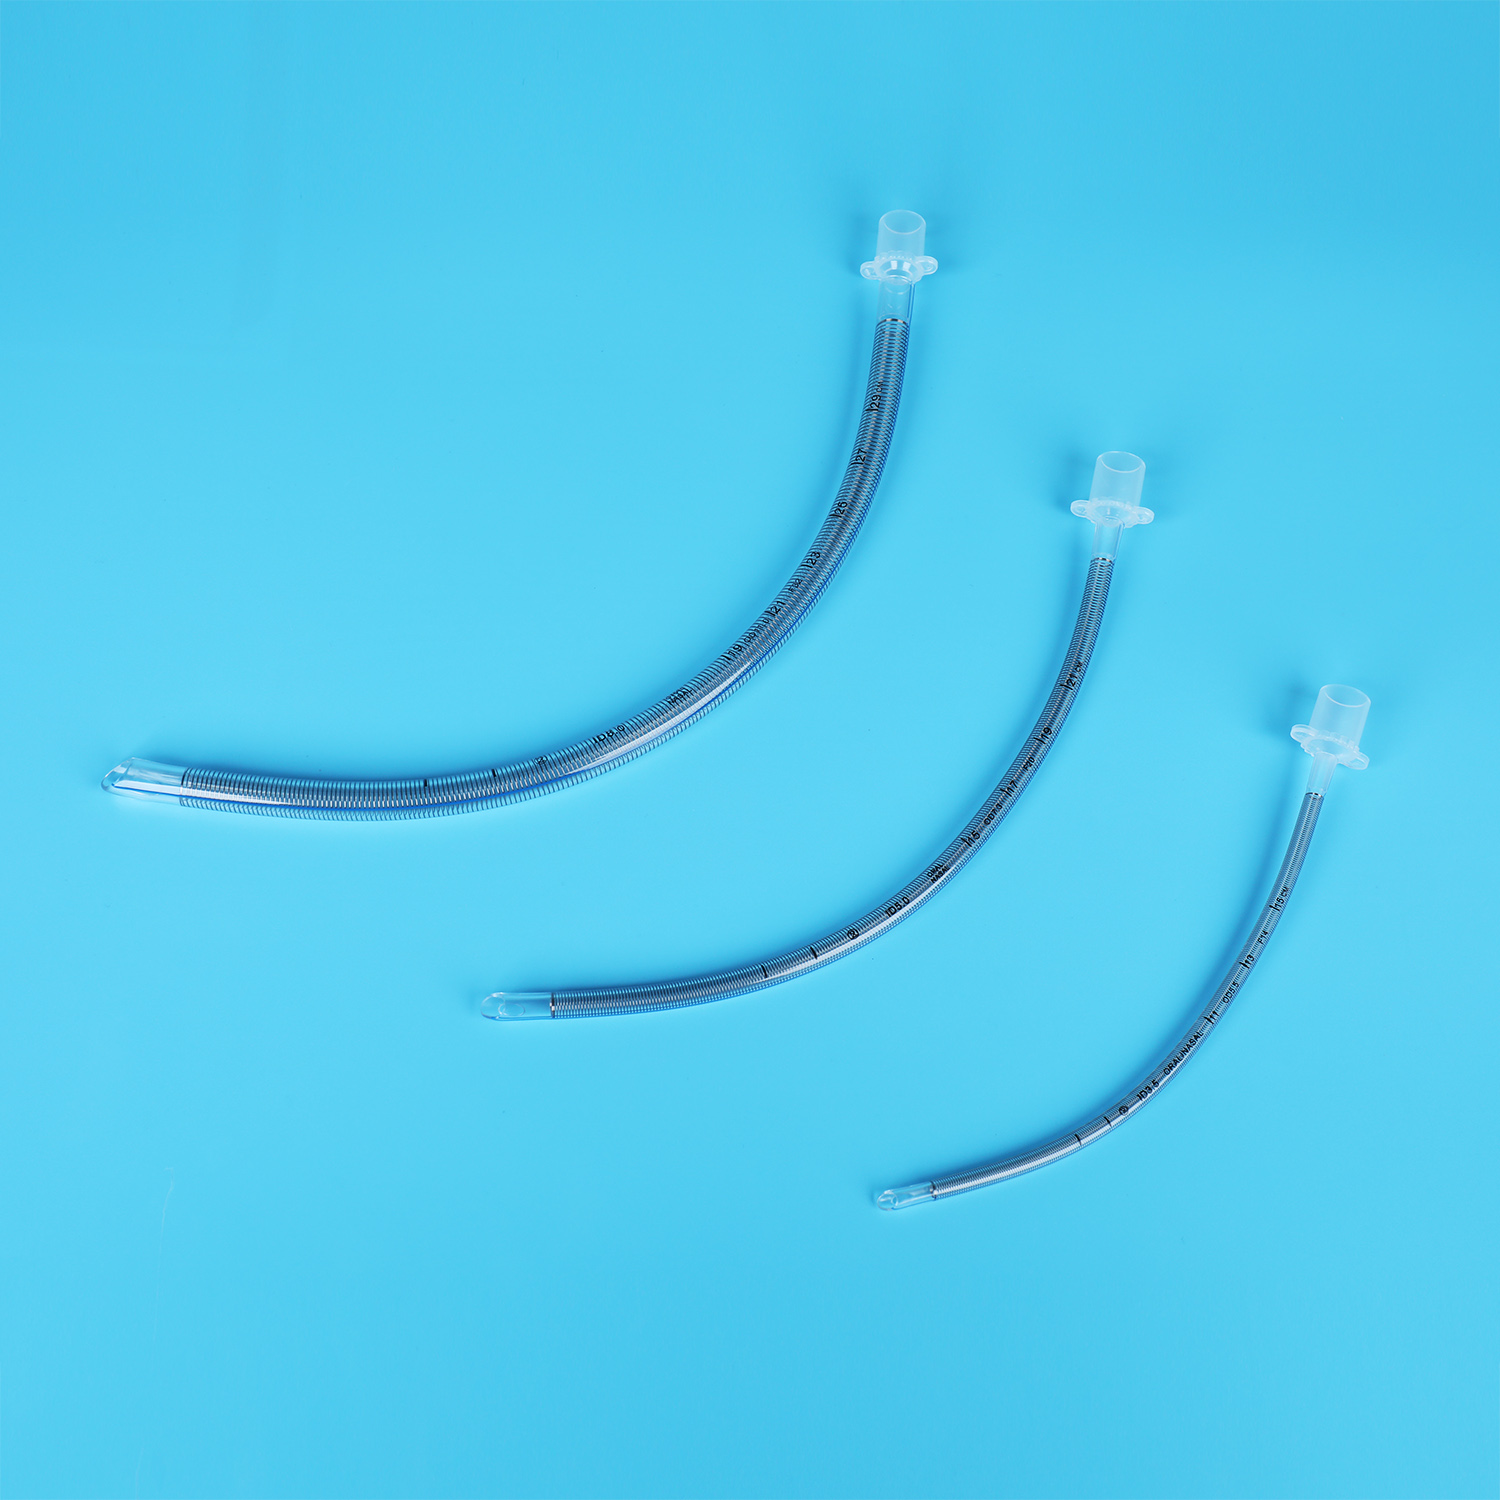 China Armored Reinforced Endotracheal Tube Flexible Soft Tip Uncuff Factory Direct Supply Whole Sale China Profile Cuff Tracheal Catheter Oxygen Tube